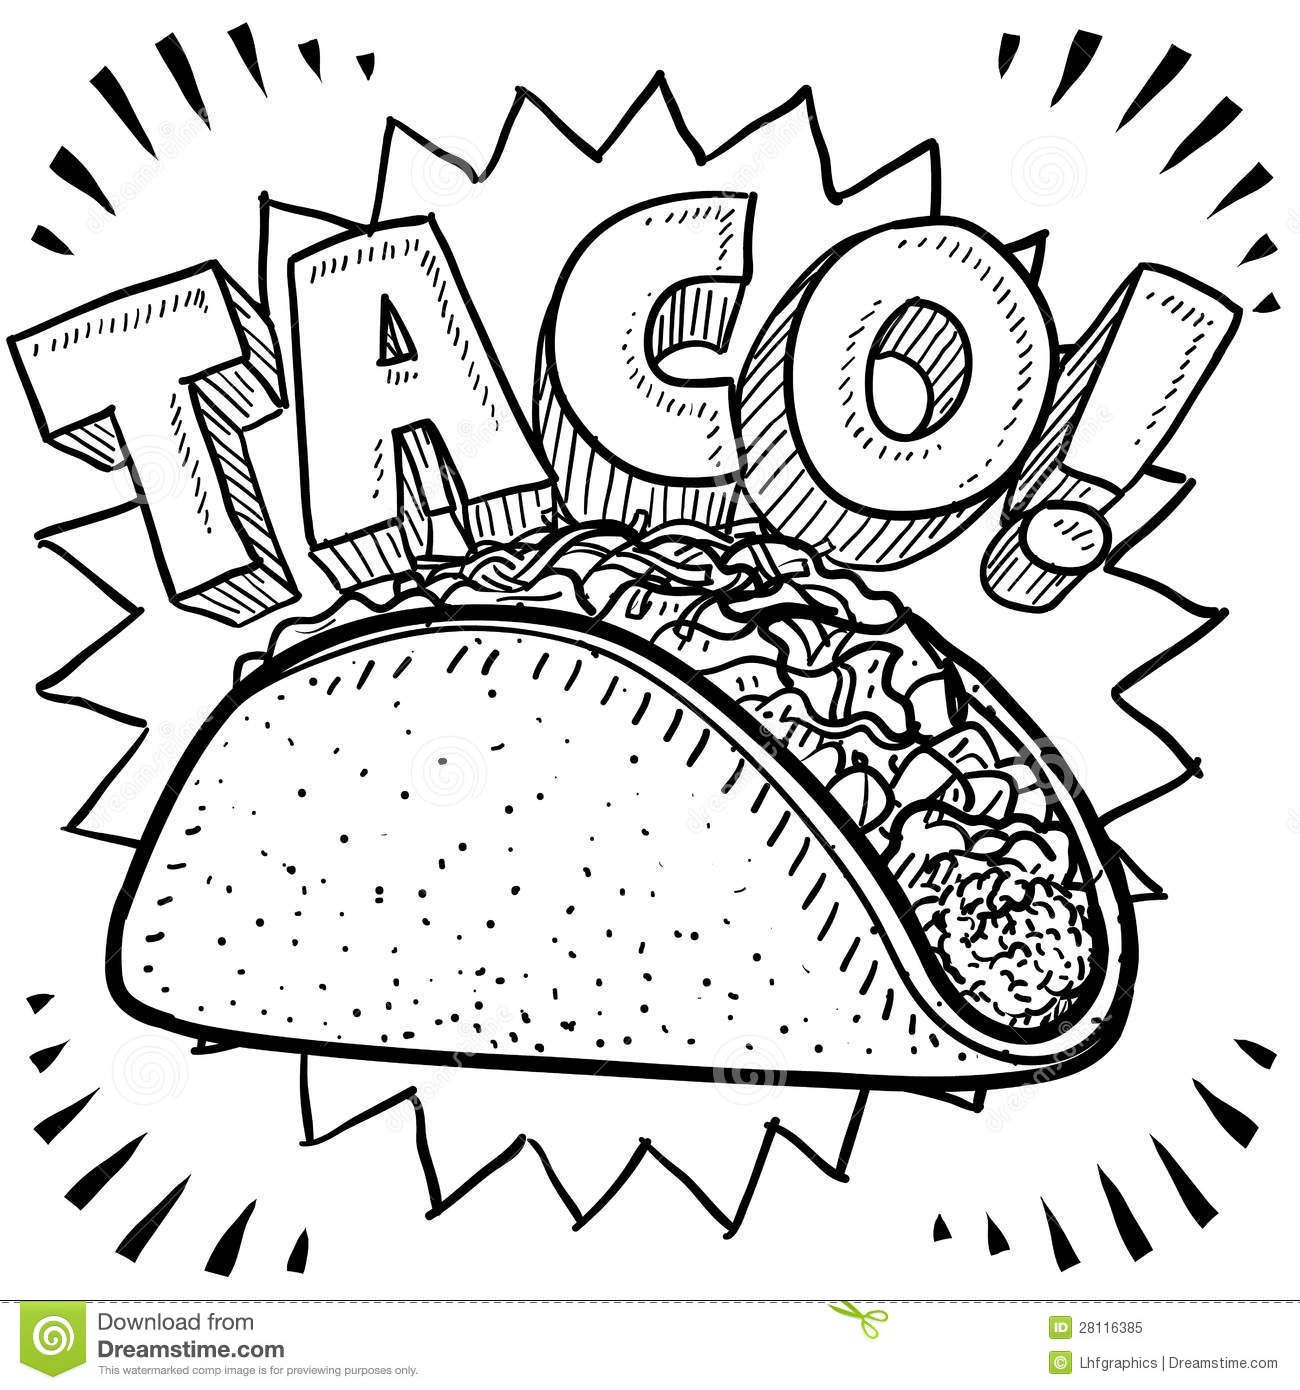 Tacos clipart drawn. Gallery for taco clip